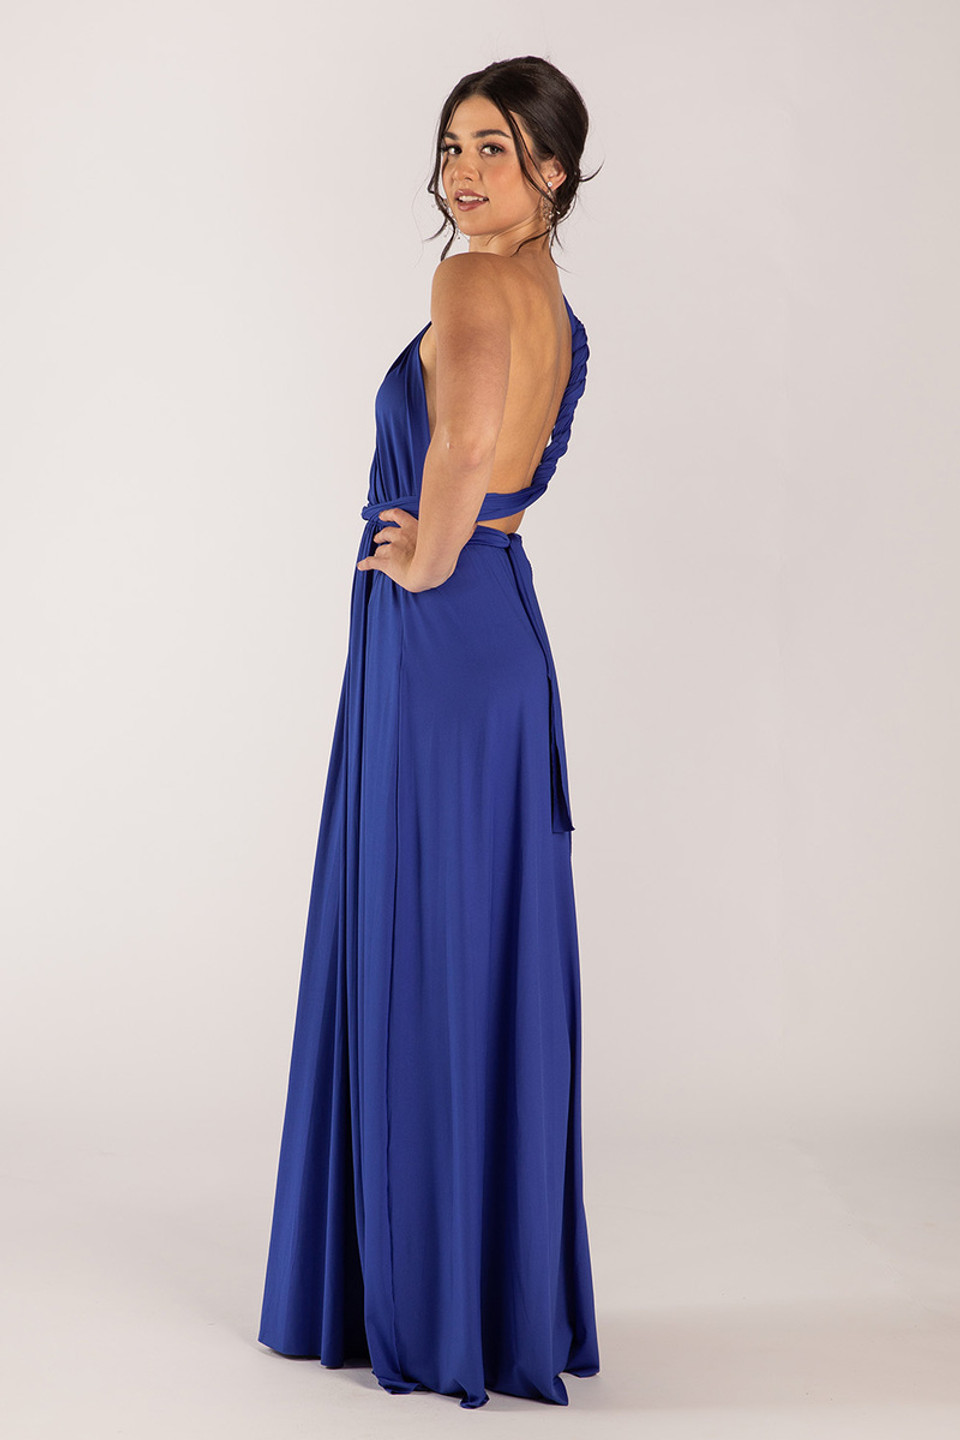 Classic Multiway Infinity Bridesmaid Dress in Royal Blue For Sale ...